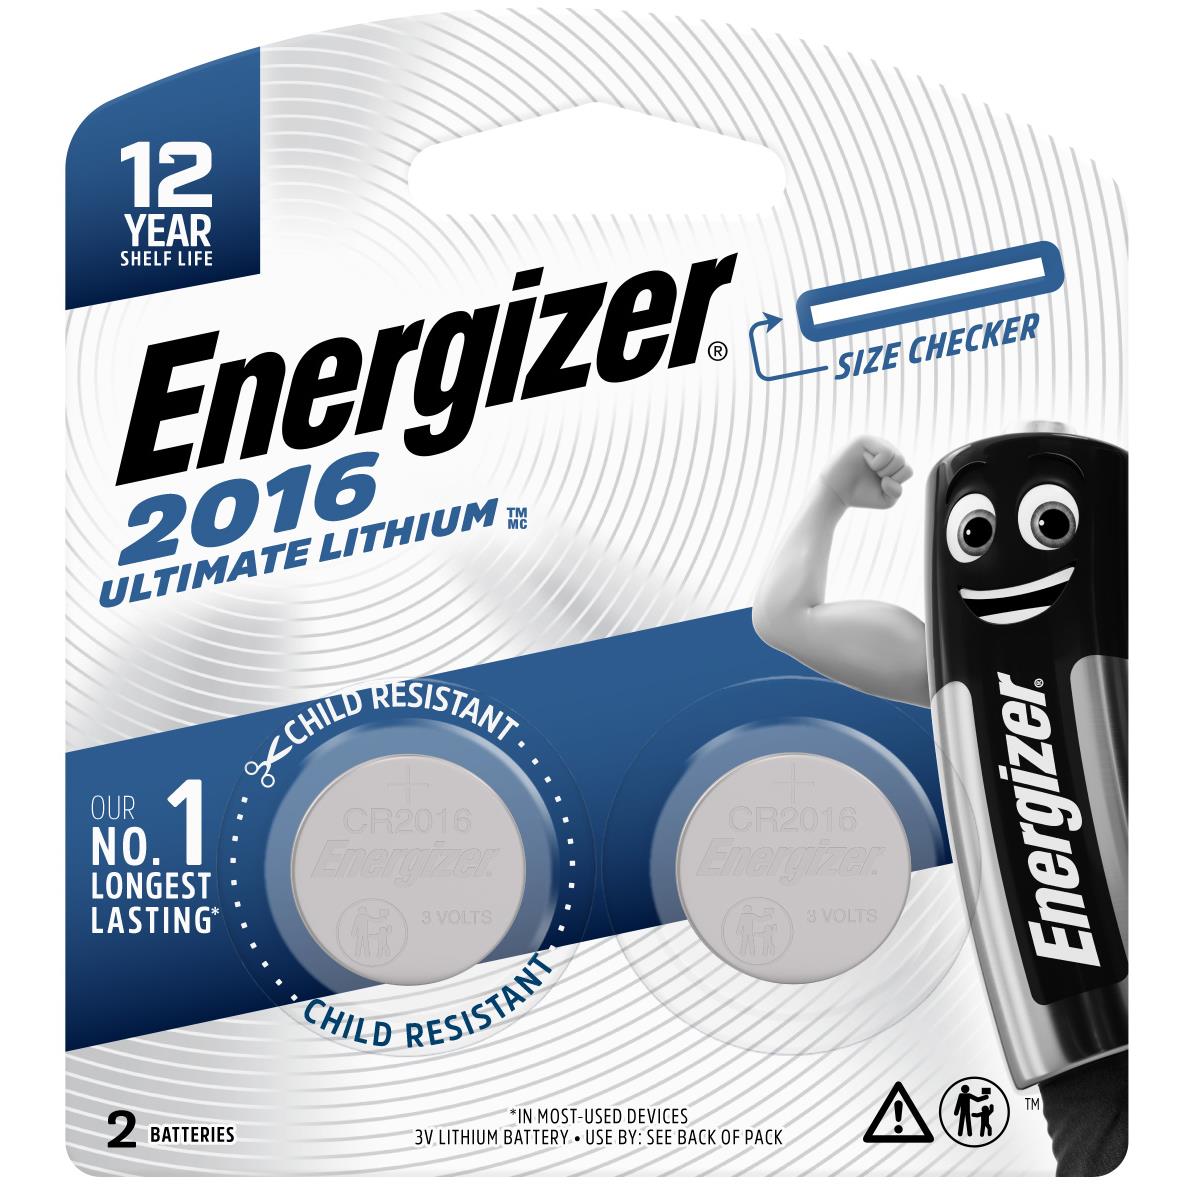 energizer ultimate lithium cr2016 coin battery (2pk)